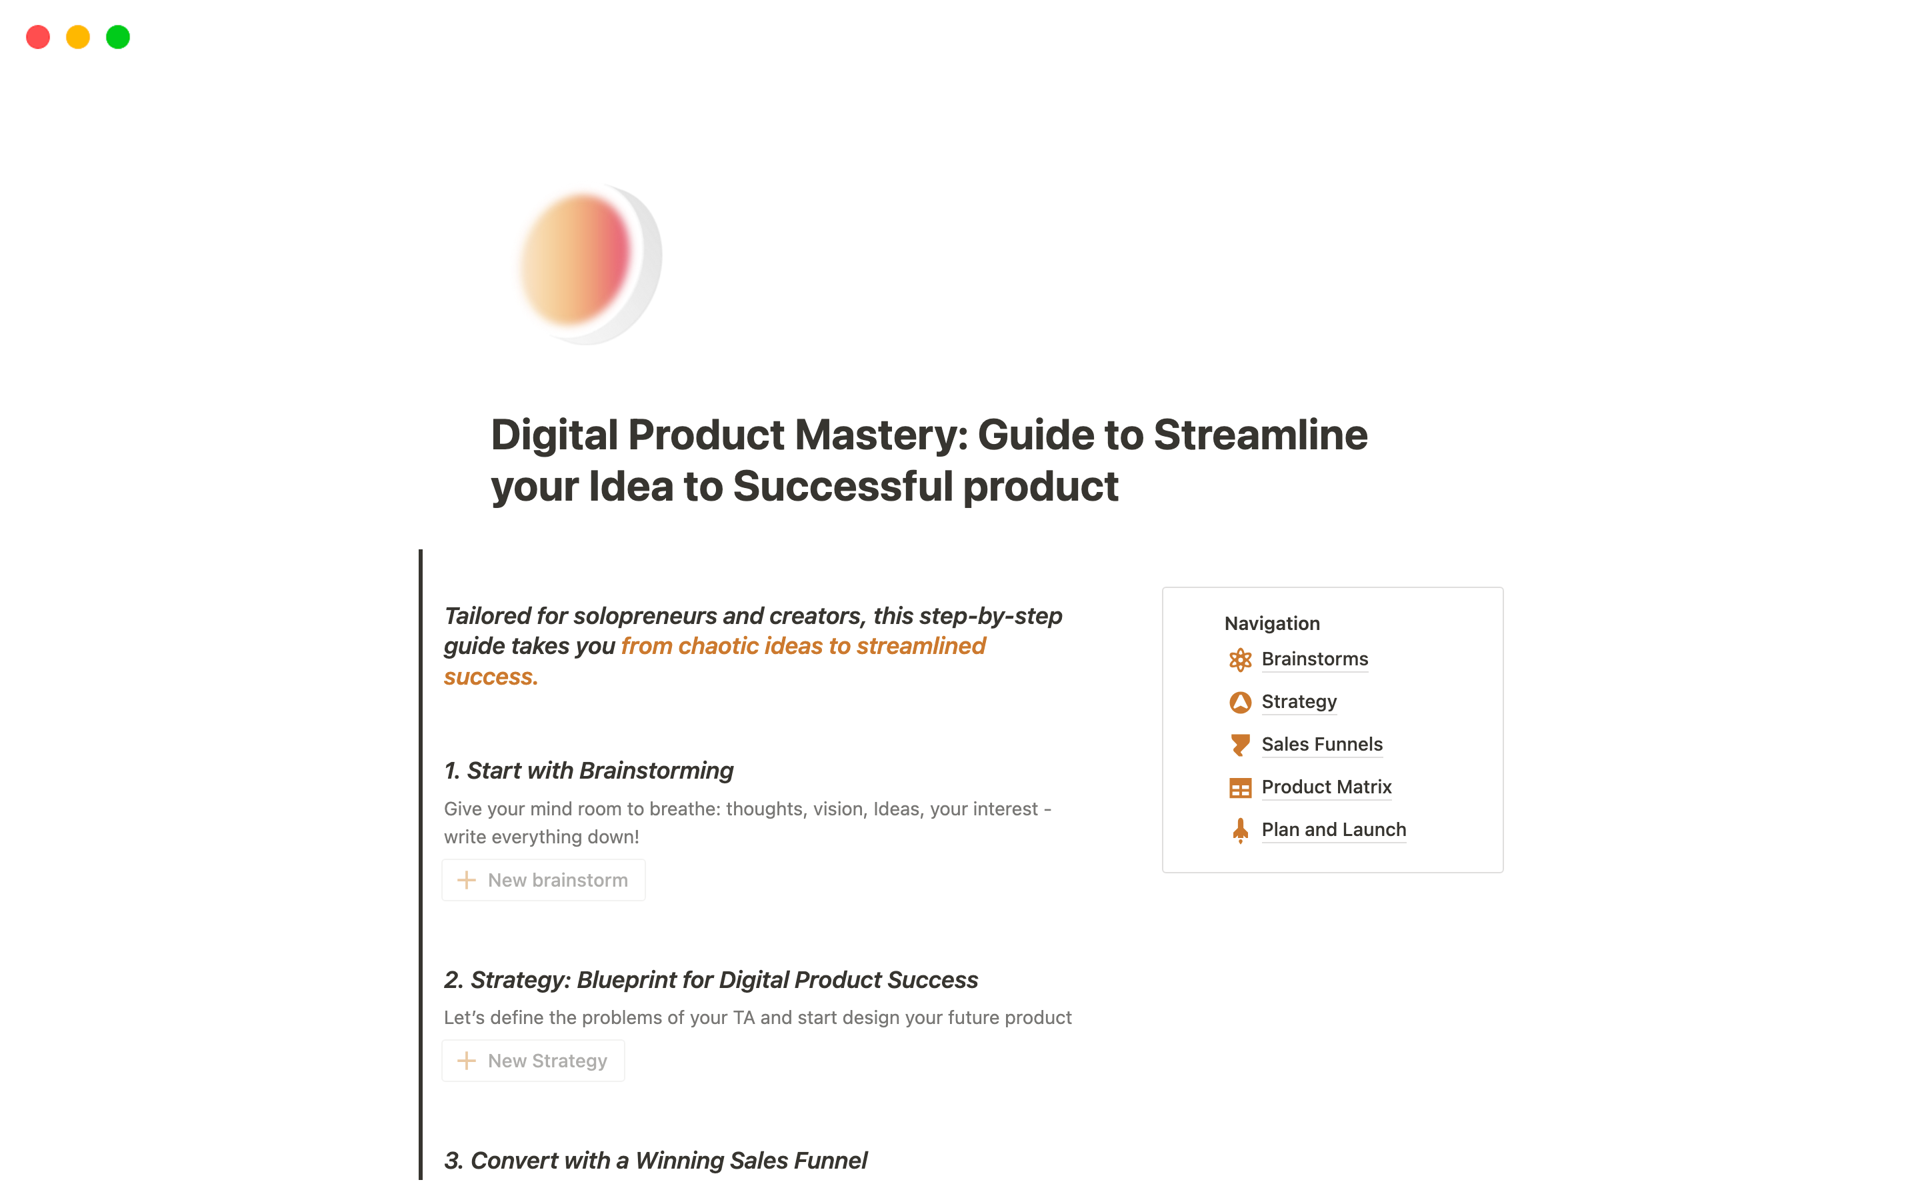 Digital Product Mastery: Guide to Streamline your idea to successful product